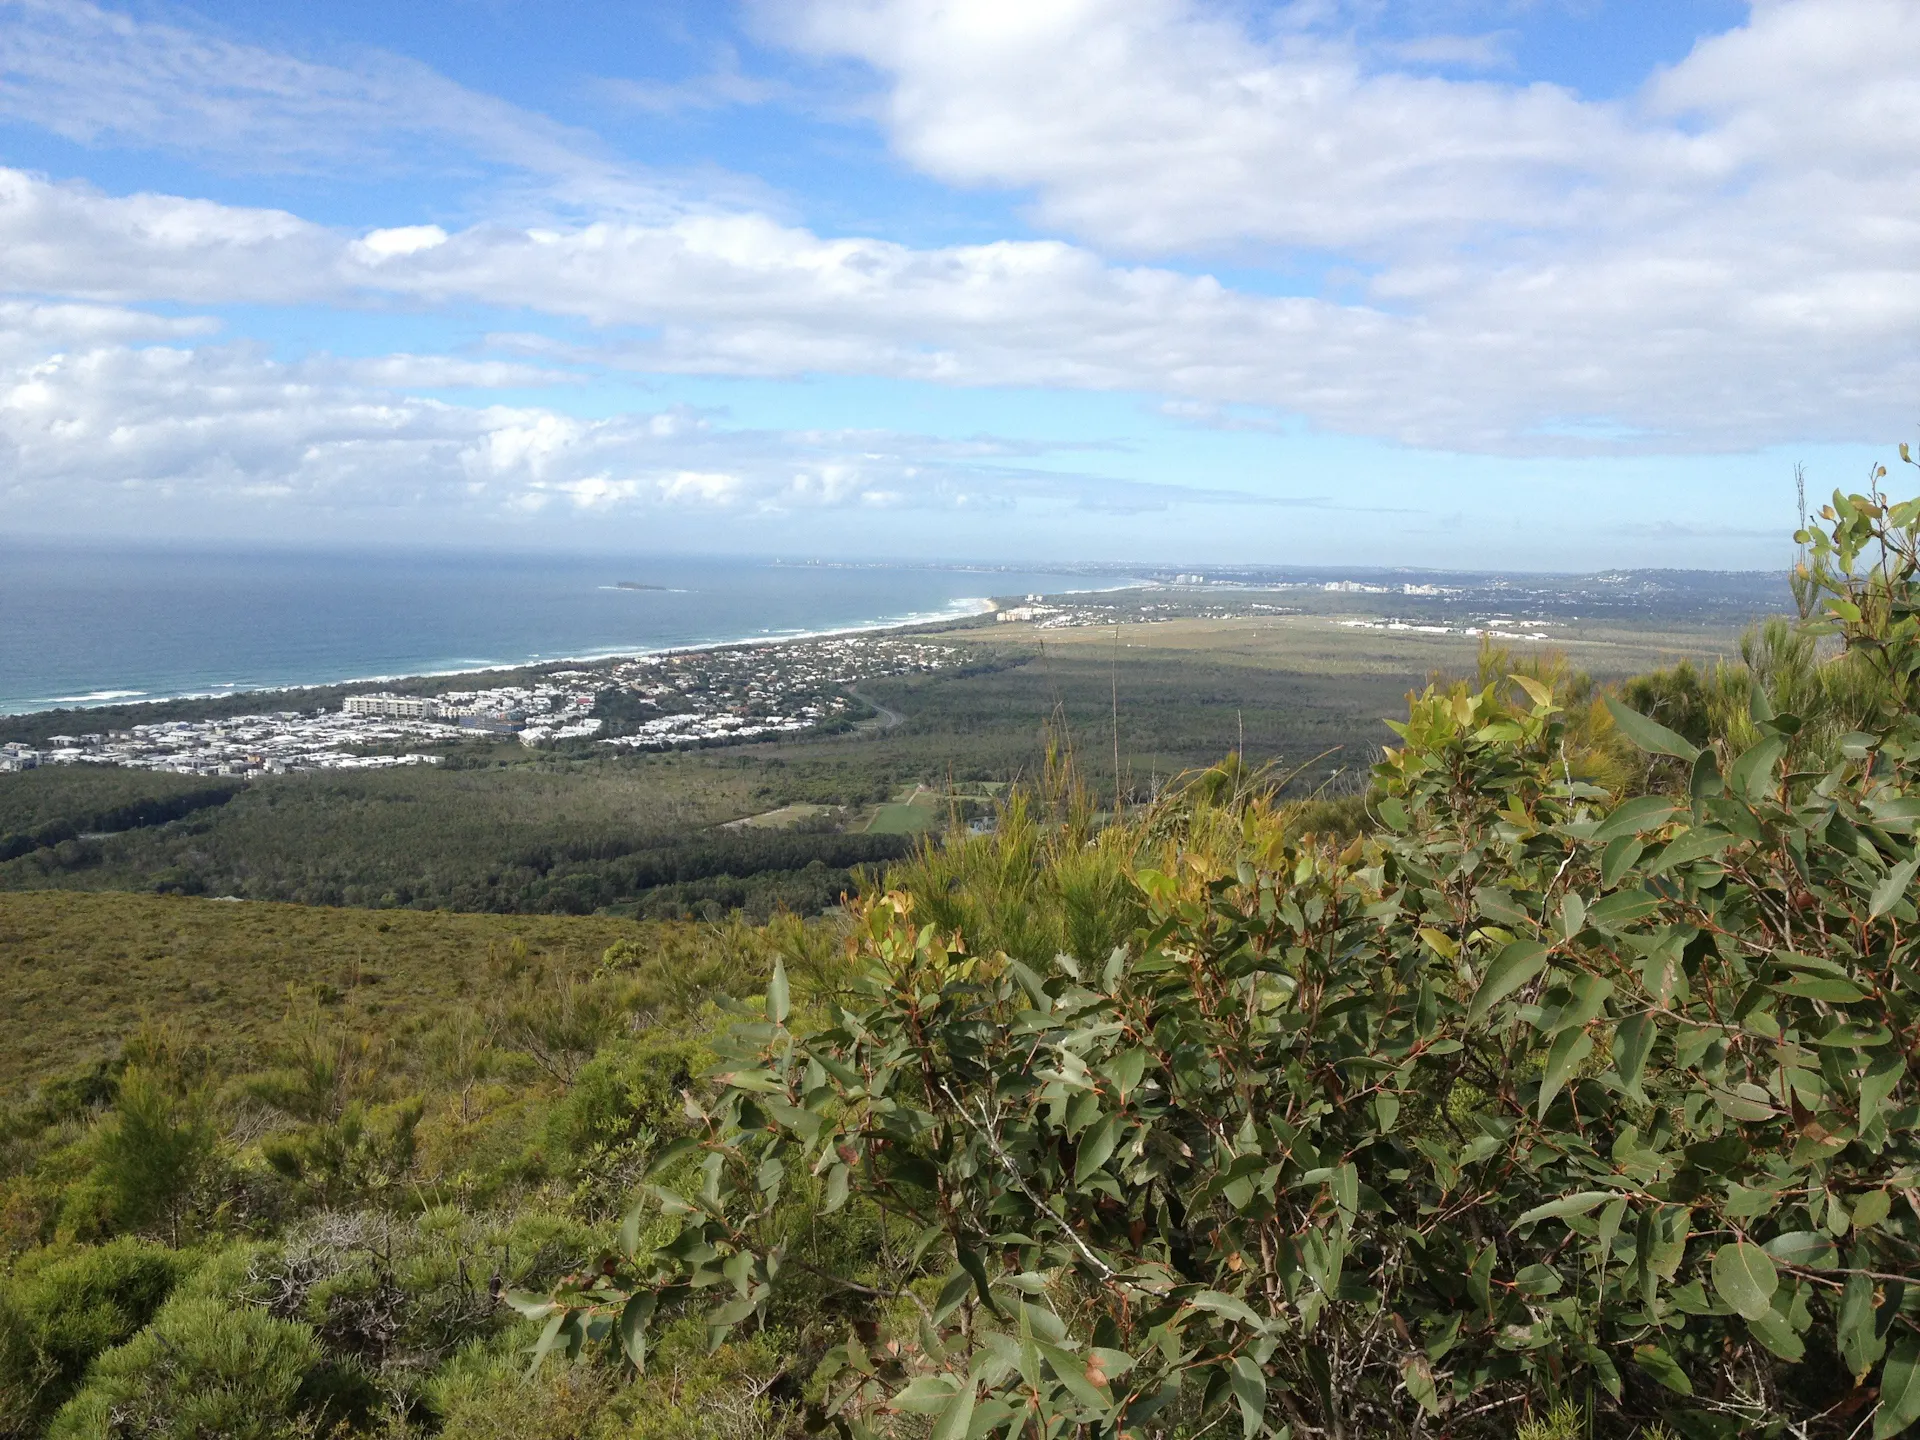 View over coastal plain from vantage point on hill with ocean in the distance.